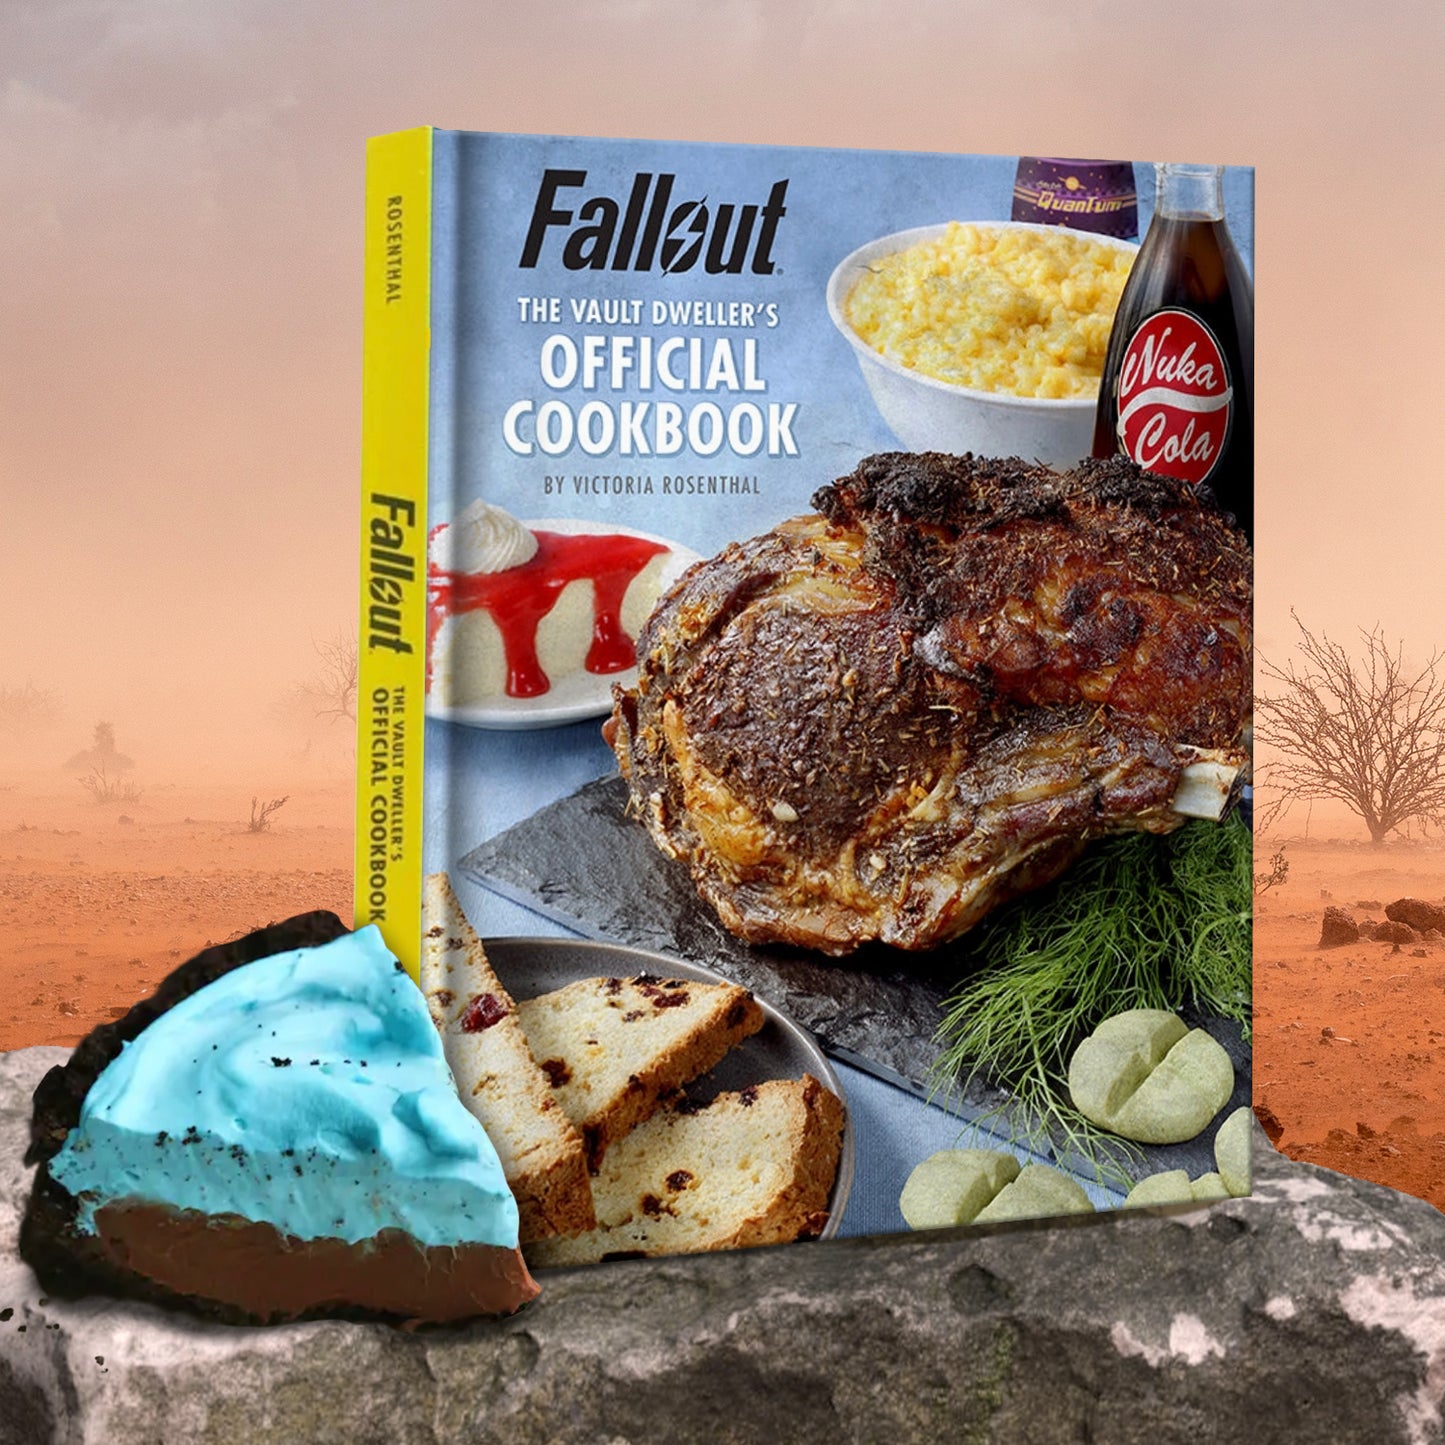 A hardcover cookbook on a rock ledge, in the middle of a red desert. Across the cover are various recipes from the book, including a roast meat dish, bread, and cheesecake. At the top left corner is black and white text that says "Fallout. The Vault Dweller's Official Cookbook." Next to the book is a slice of chocolate pie with a blue topping.